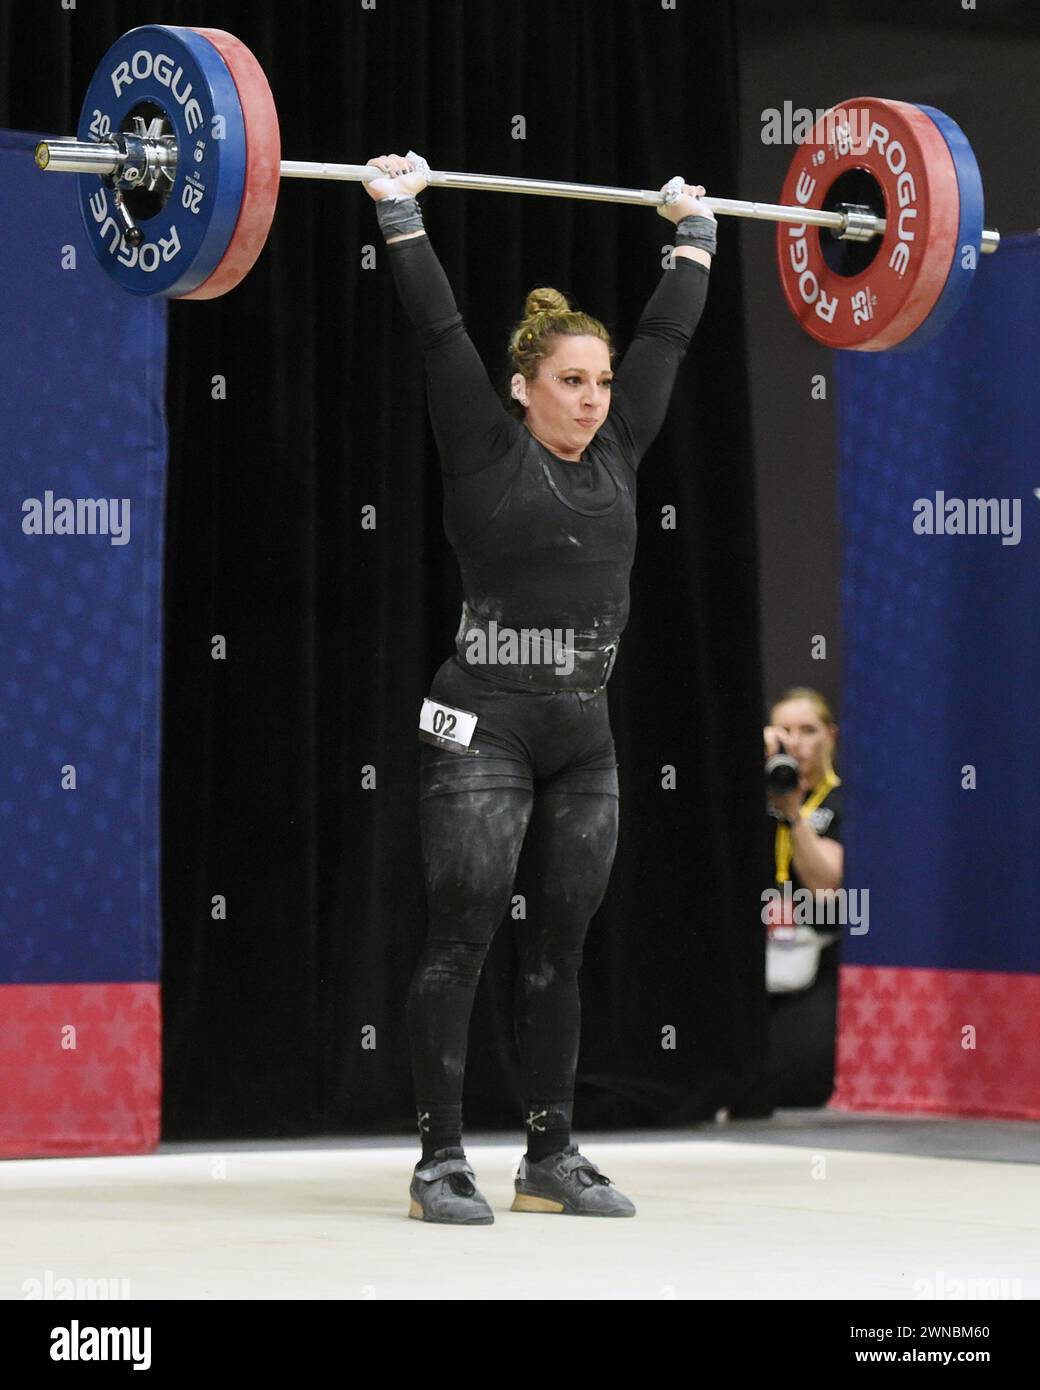 Columbus, Ohio, United States. Mar 1 Feb, 2024. Shelby Pflug lifts 110kgs in the clean and jerk in the Women's Weightlifting Championships at the Arnold Sports Festival in Columbus, Ohio, USA. Credit: Brent Clark/Alamy Live News Stock Photo